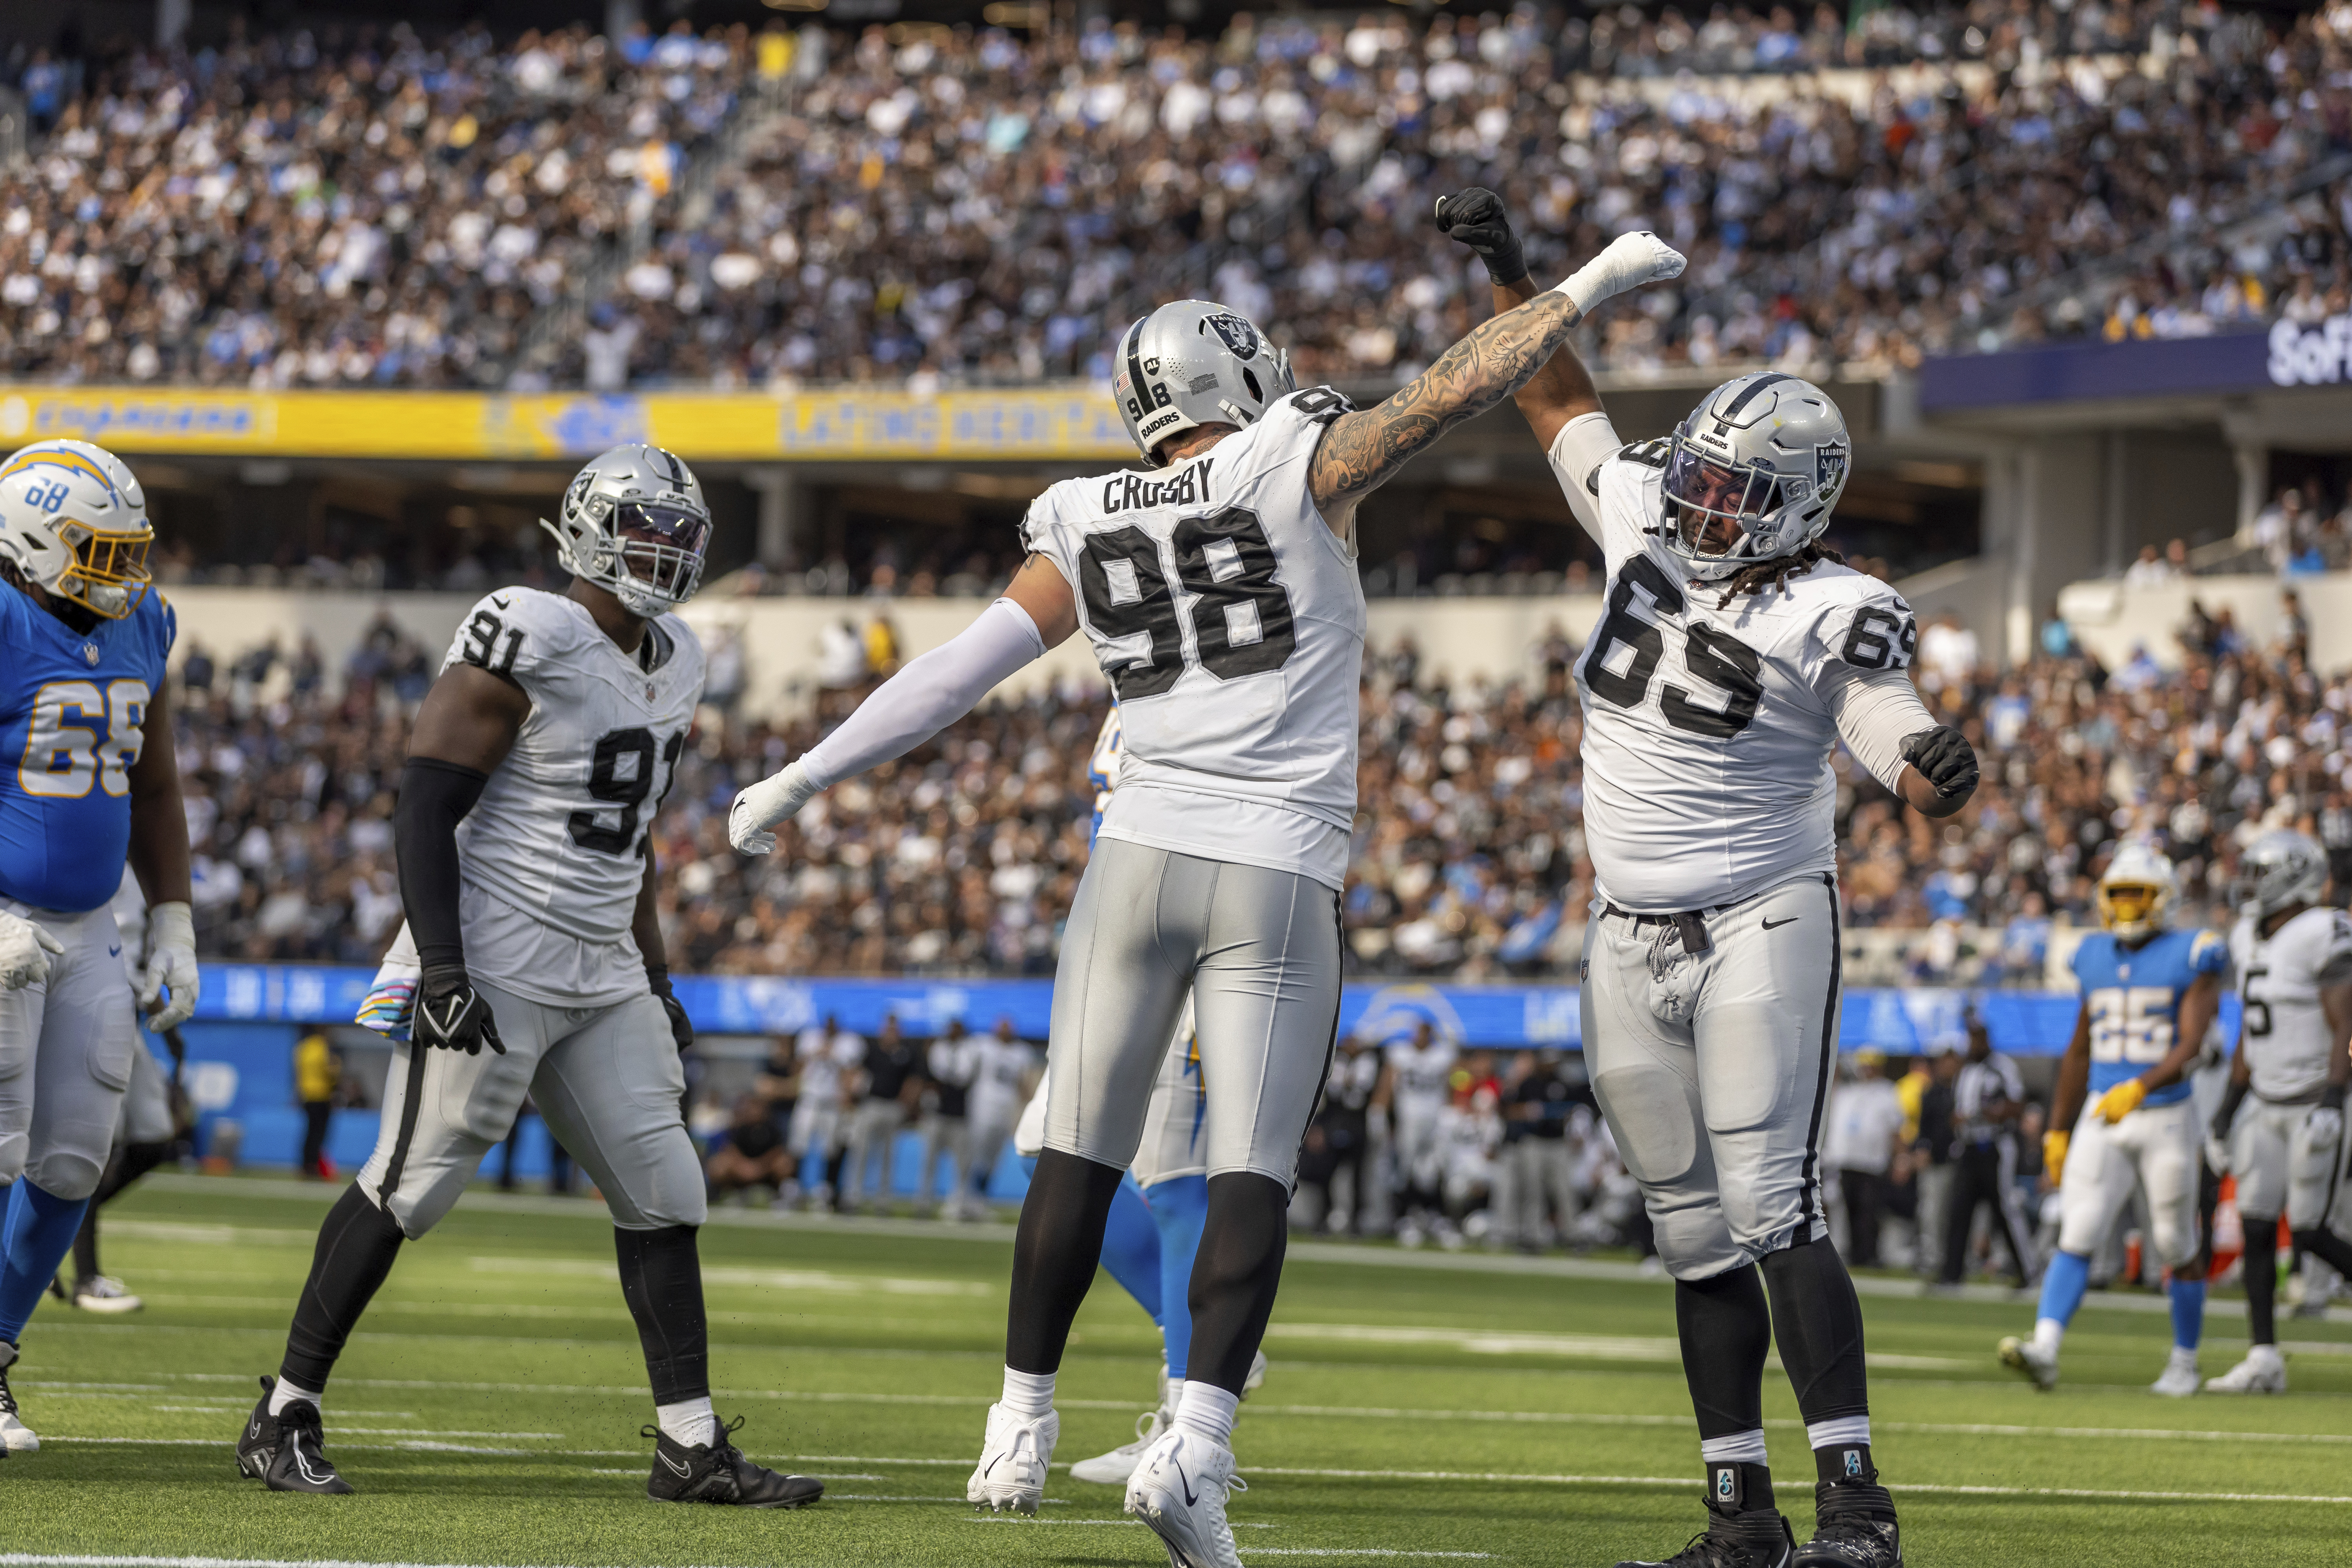 Chargers vs. Raiders livestreams: Watch the Week 1 NFL matchup live